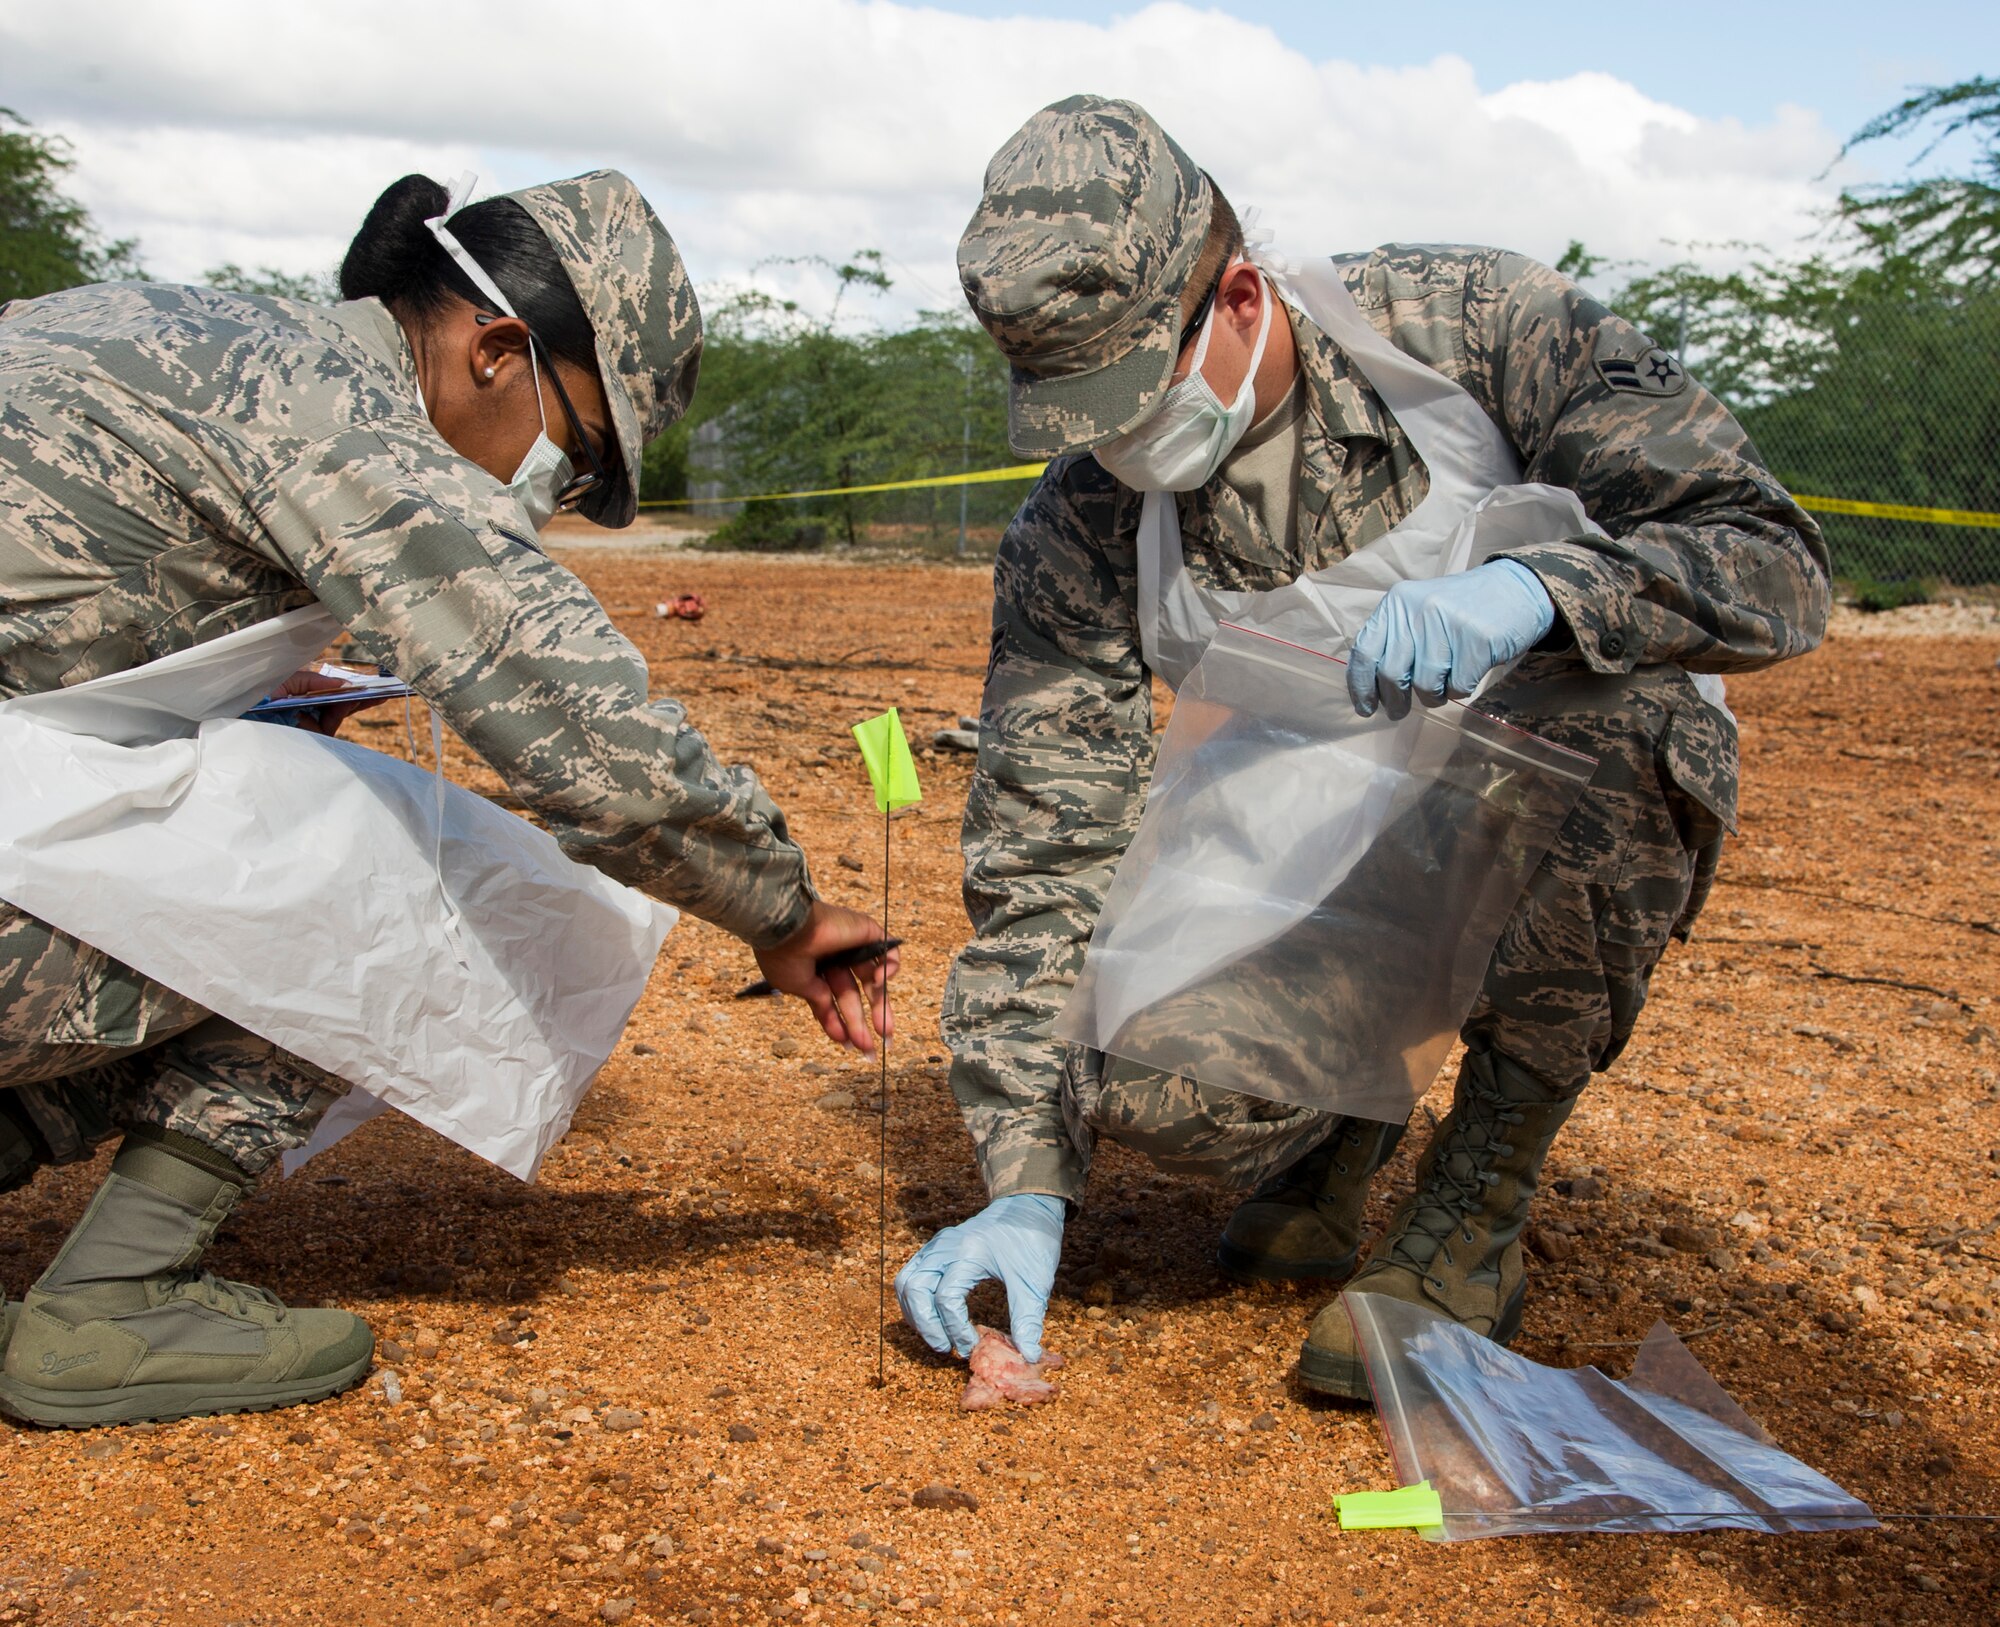 Members of the 647th Force Support Squadron search and recovery team tag and mark simulated remains during the search and recovery team’s training event on Joint Base Pearl Harbor-Hickam, Hawaii, Oct. 27, 2017. The search and recovery team is tasked with recovering human remains from accident sites. (U.S. Air Force photo by Tech. Sgt. Heather Redman)